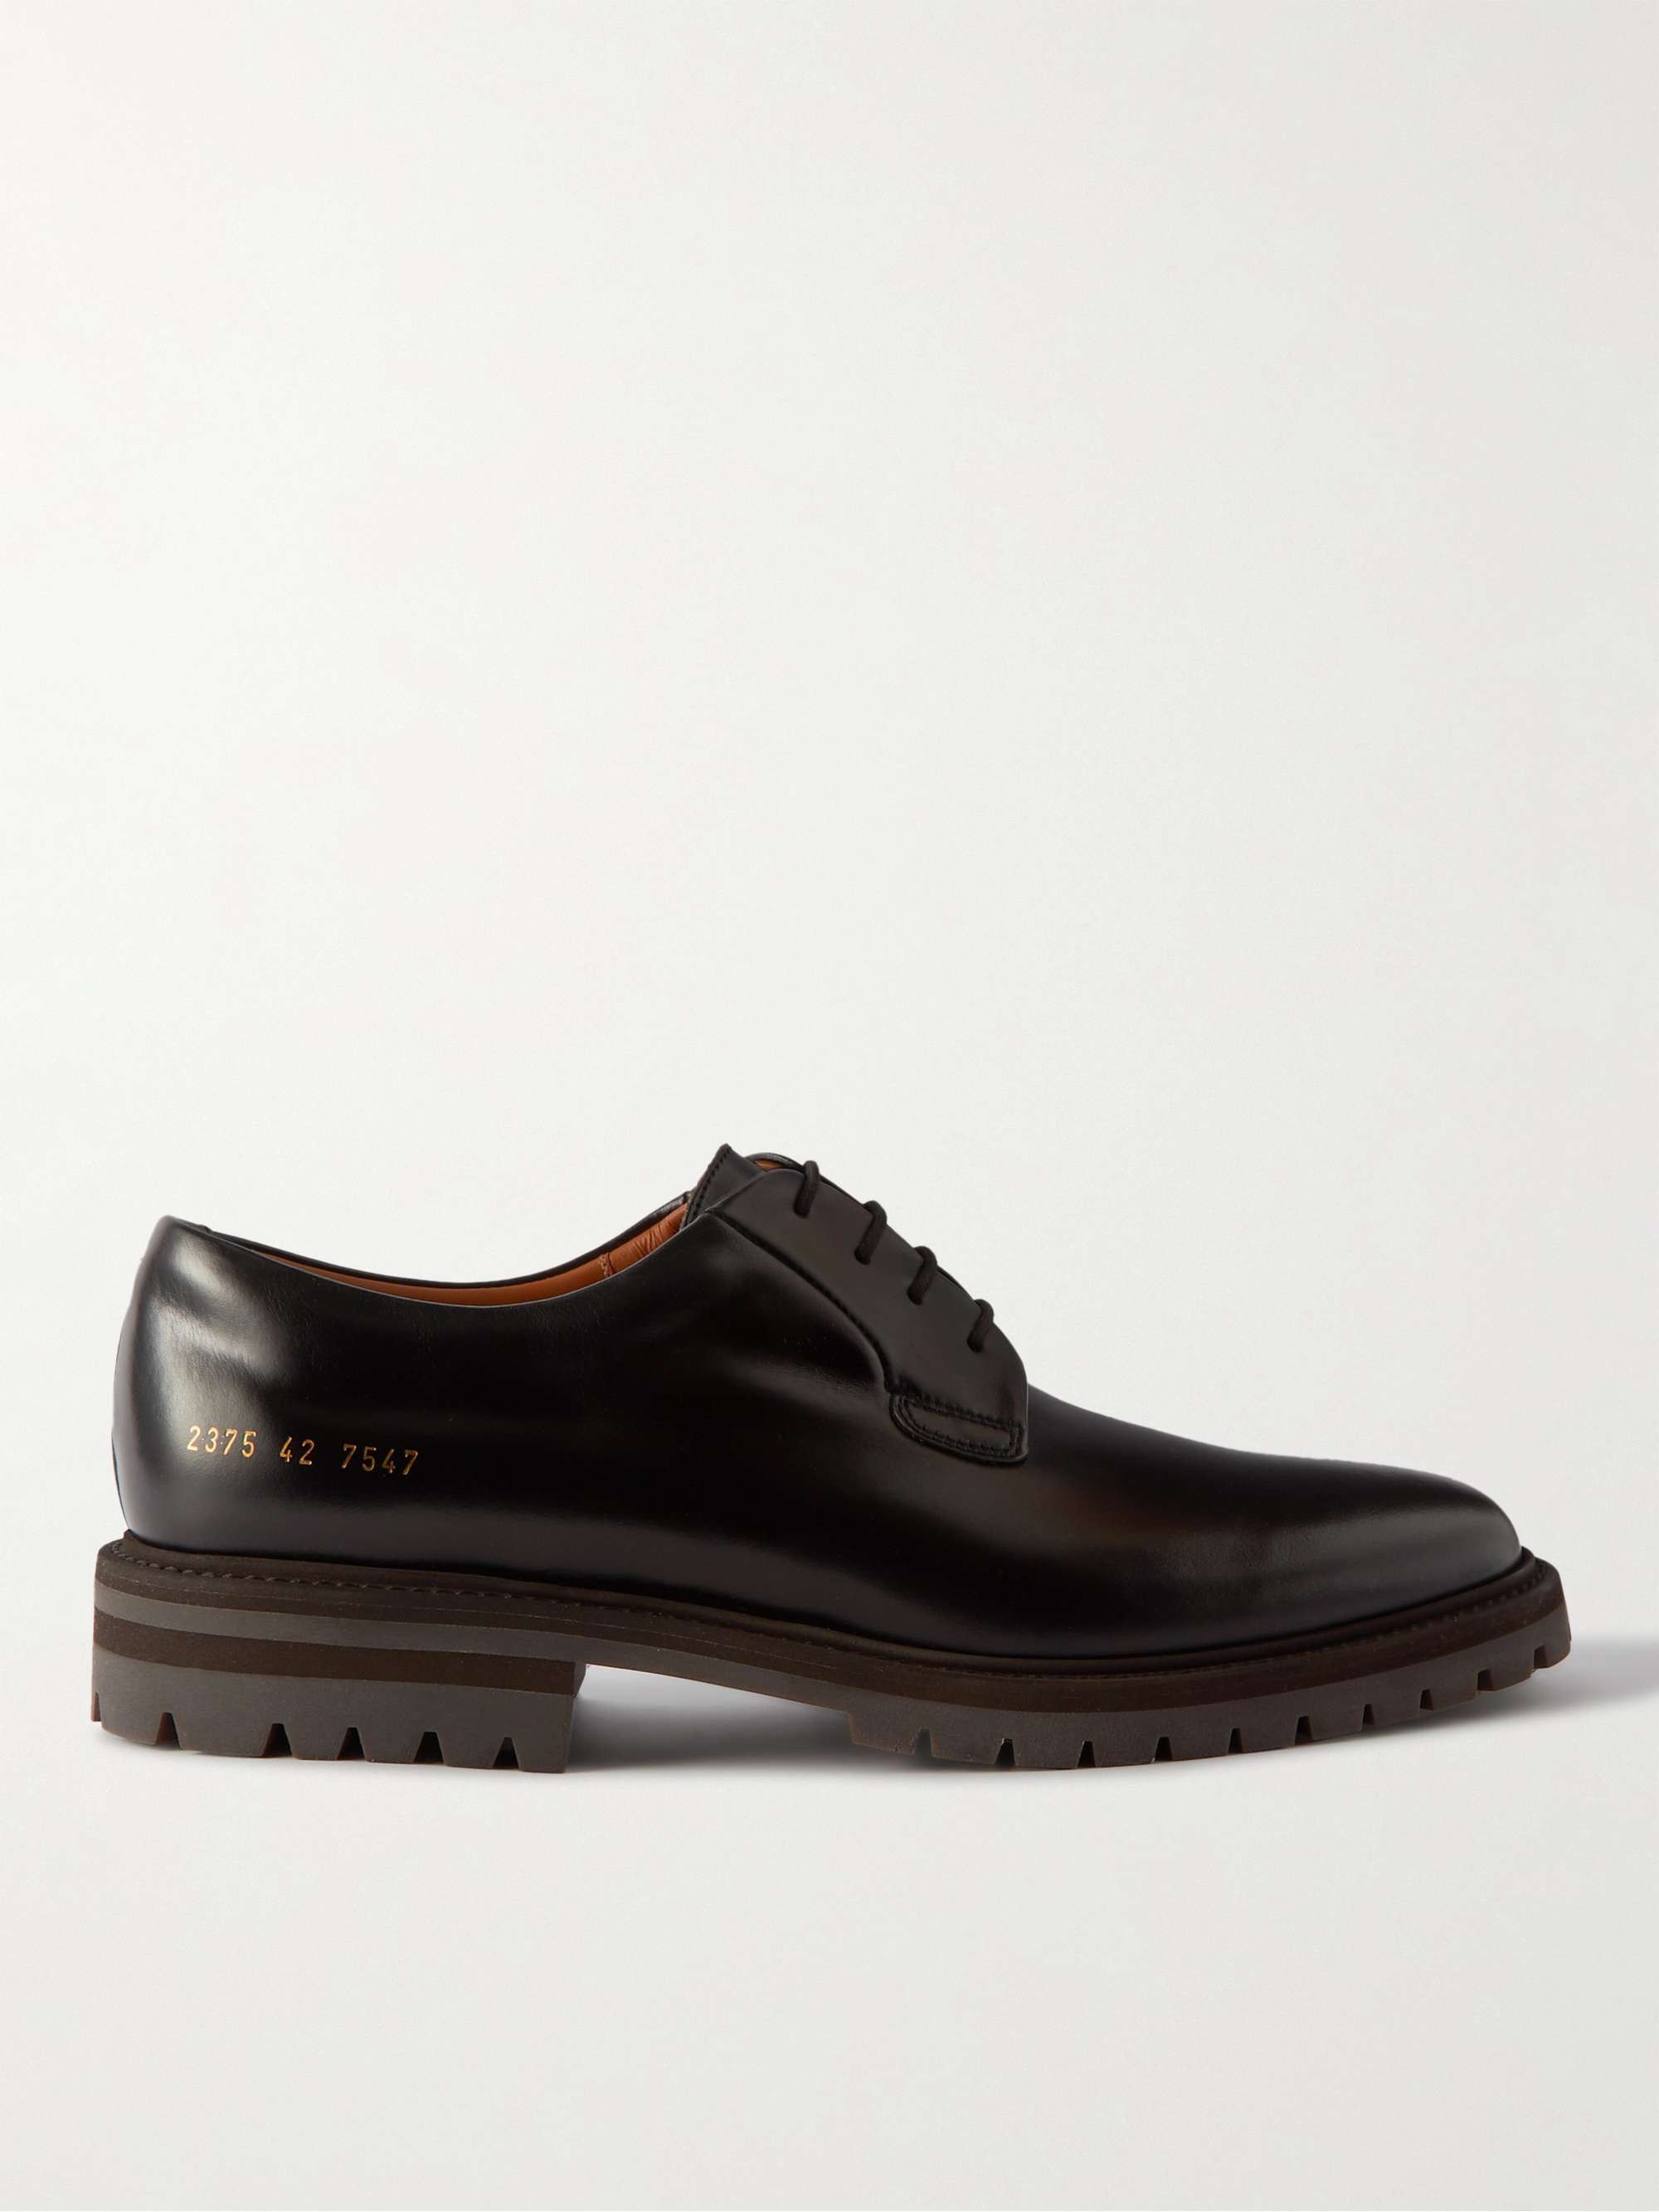 Pre-owned Common Projects Derby Black 2375-7547 Shoes